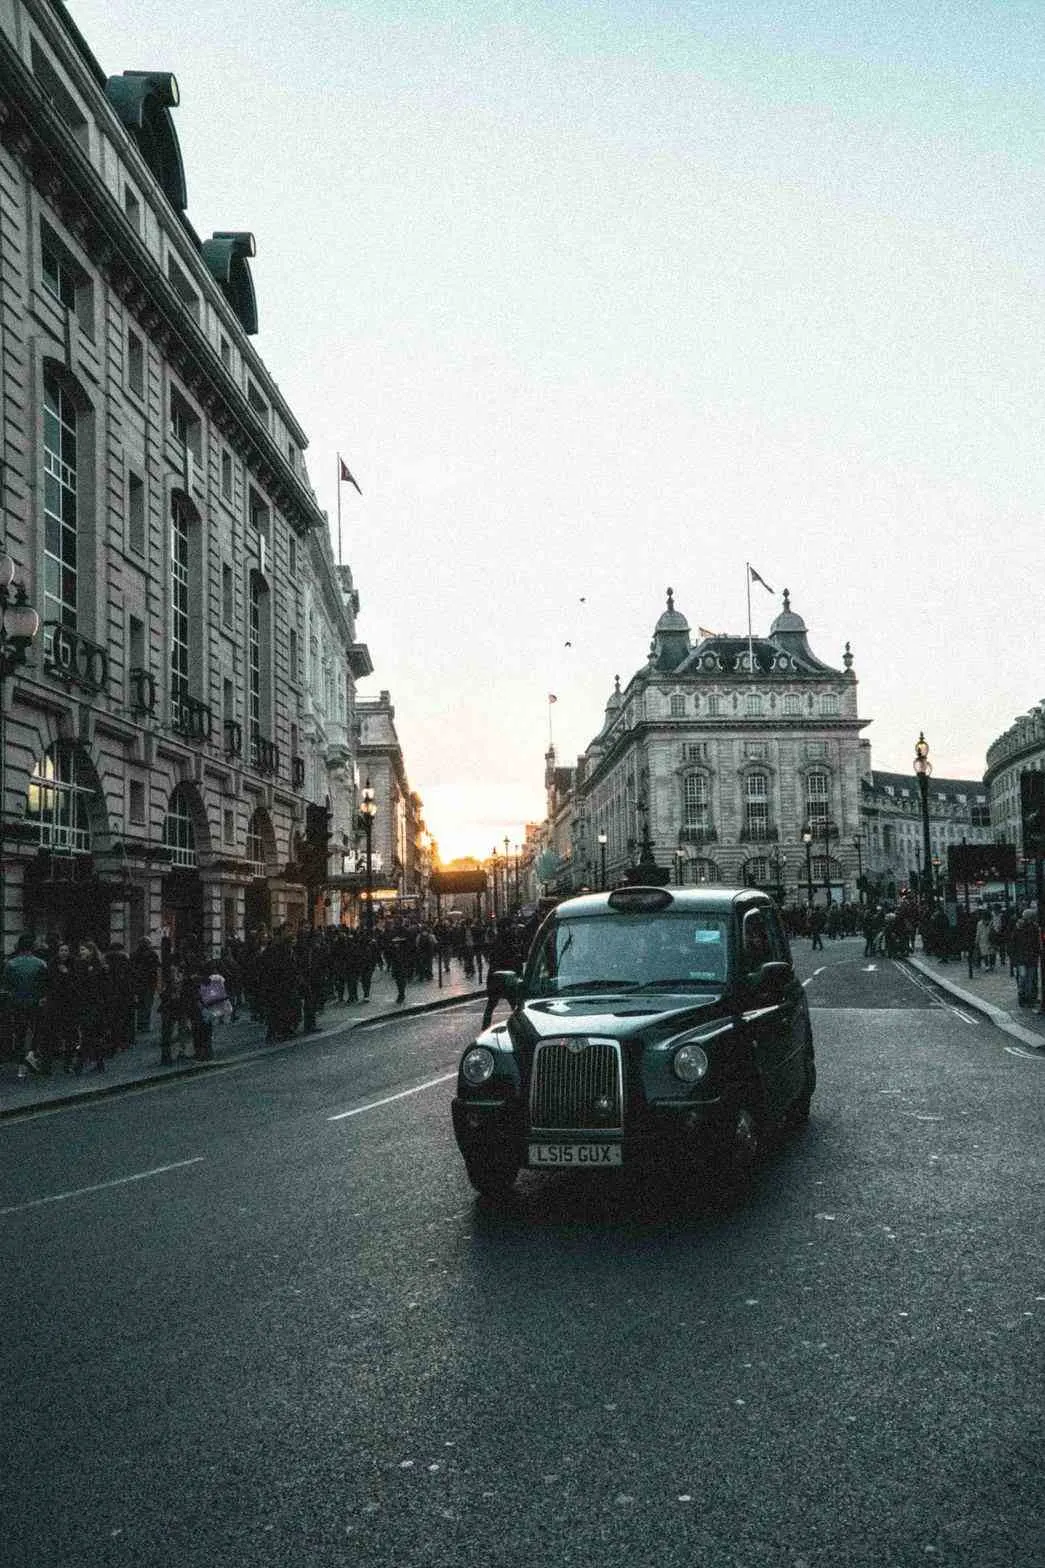 Classic shot of Piccadilly circus with Black Cab.